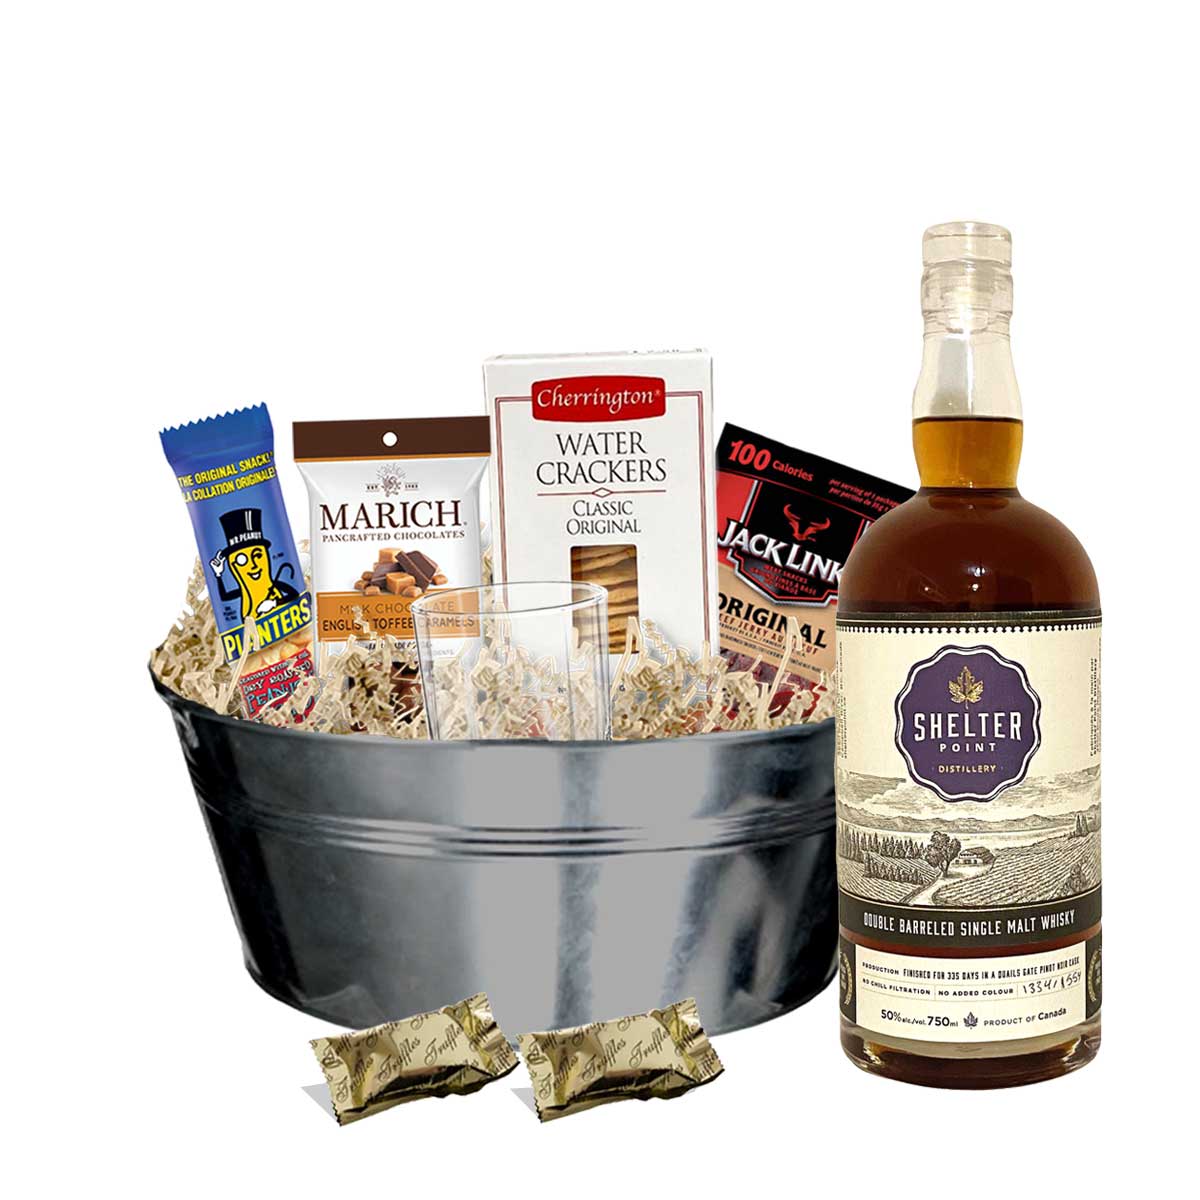 TAG Liquor Stores BC - Shelter Point Double Barreled Whisky 750ml Gift Basket